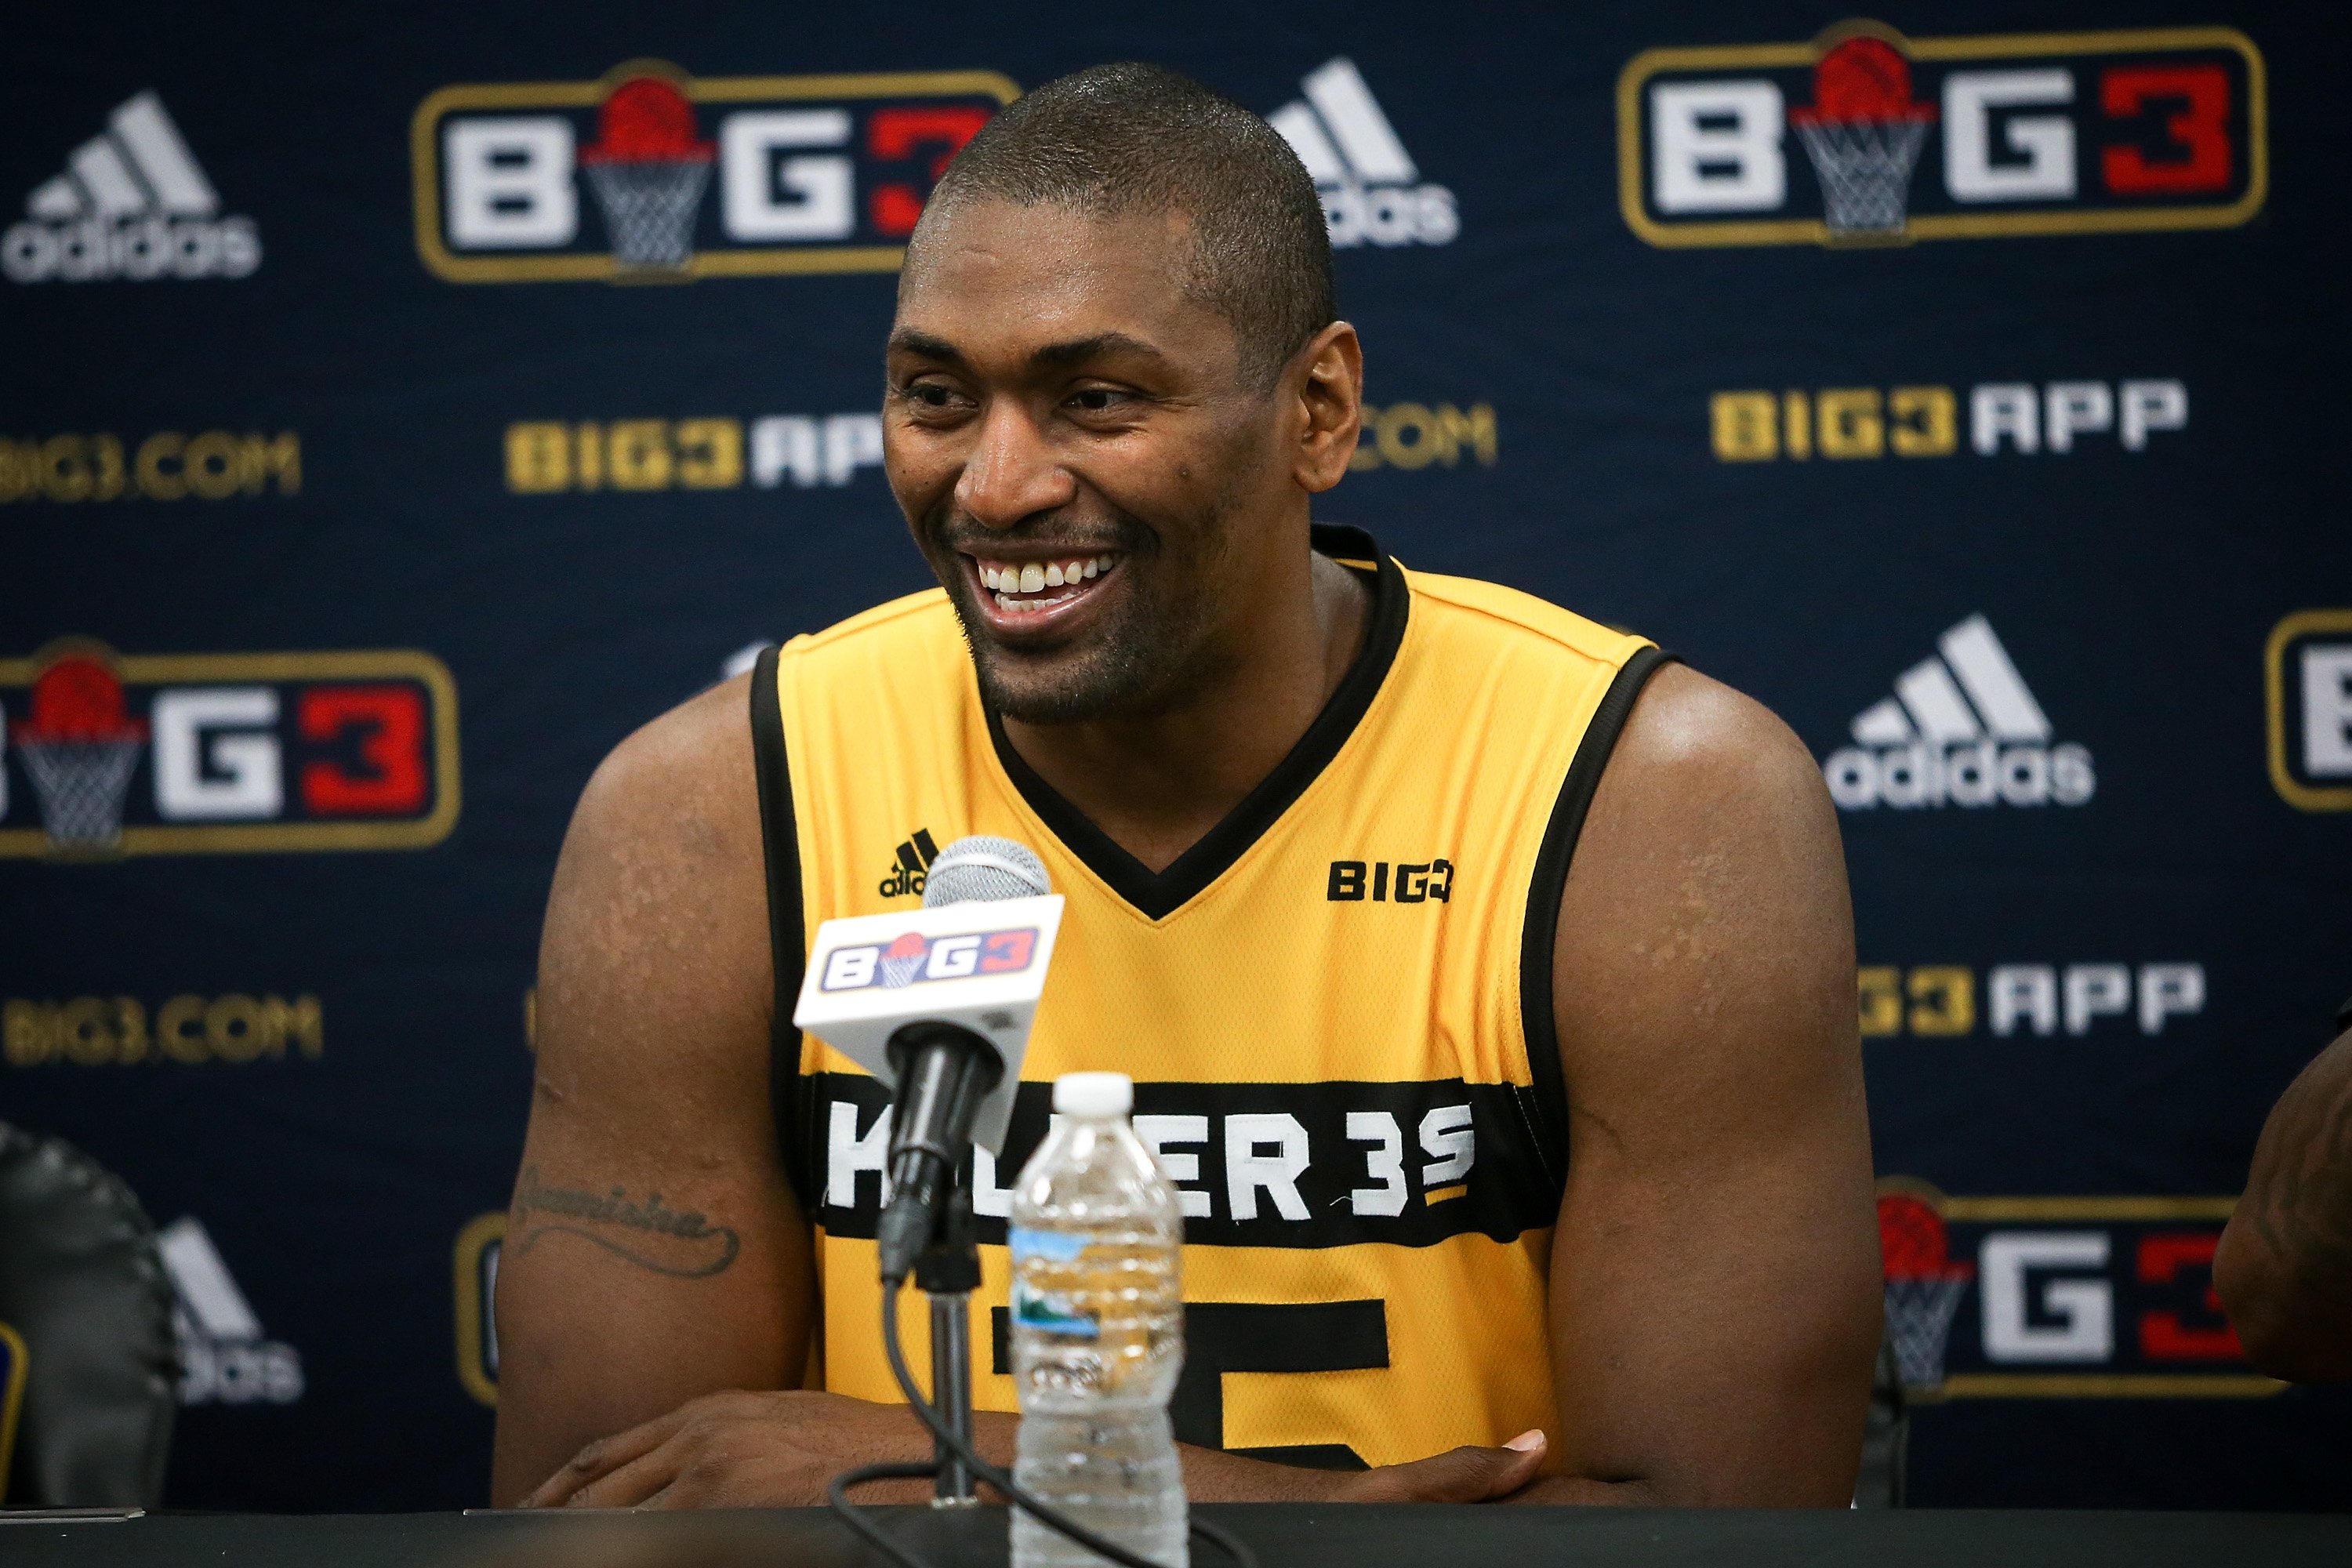  Metta World Peace speaks at United Center on June 29, 2018 | Photo: Getty Images